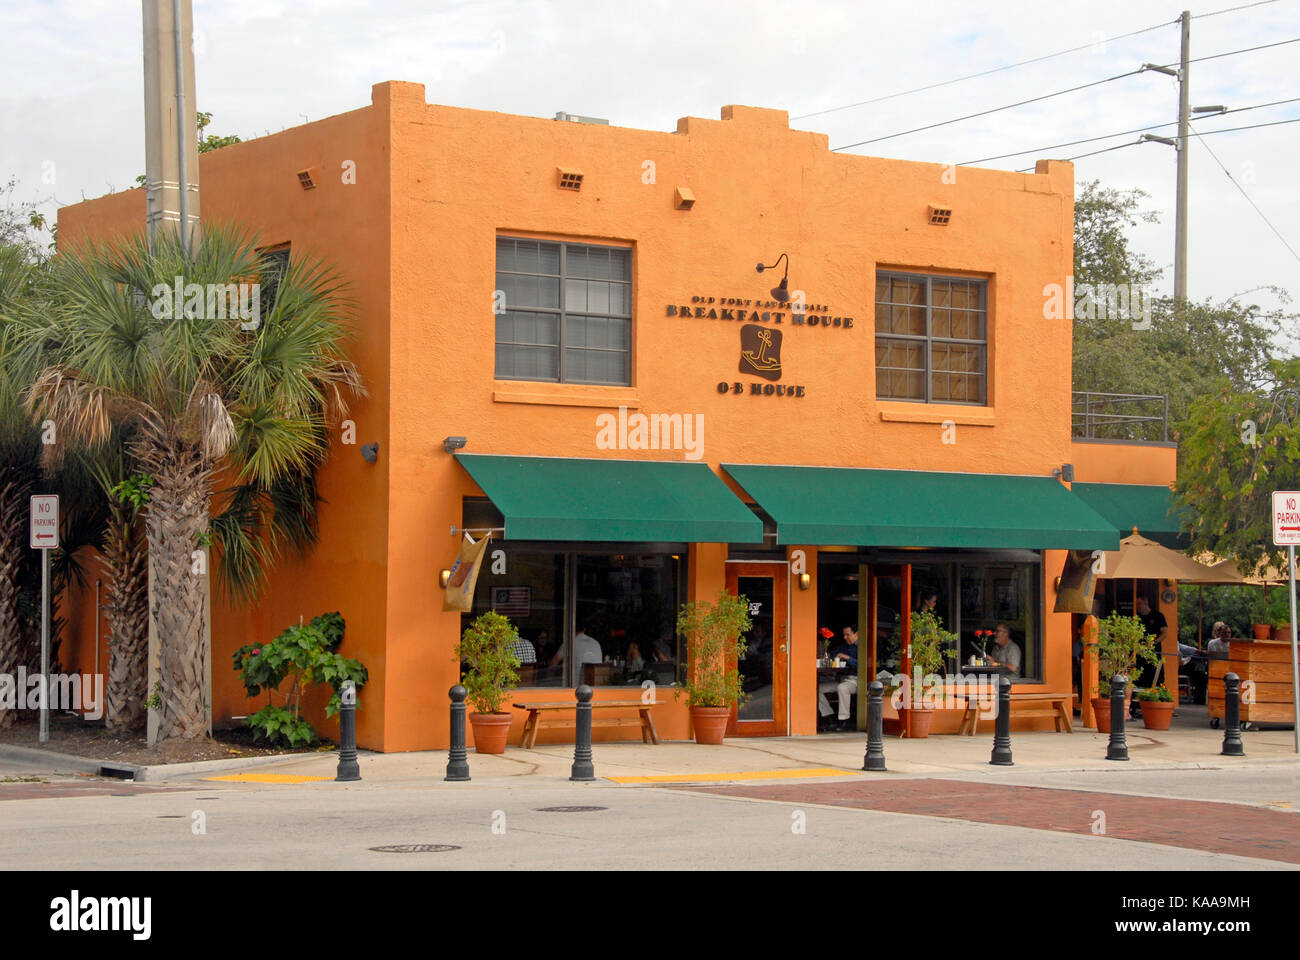 Old Fort Lauderdale Breakfast House. Florida, USA Stock Photo